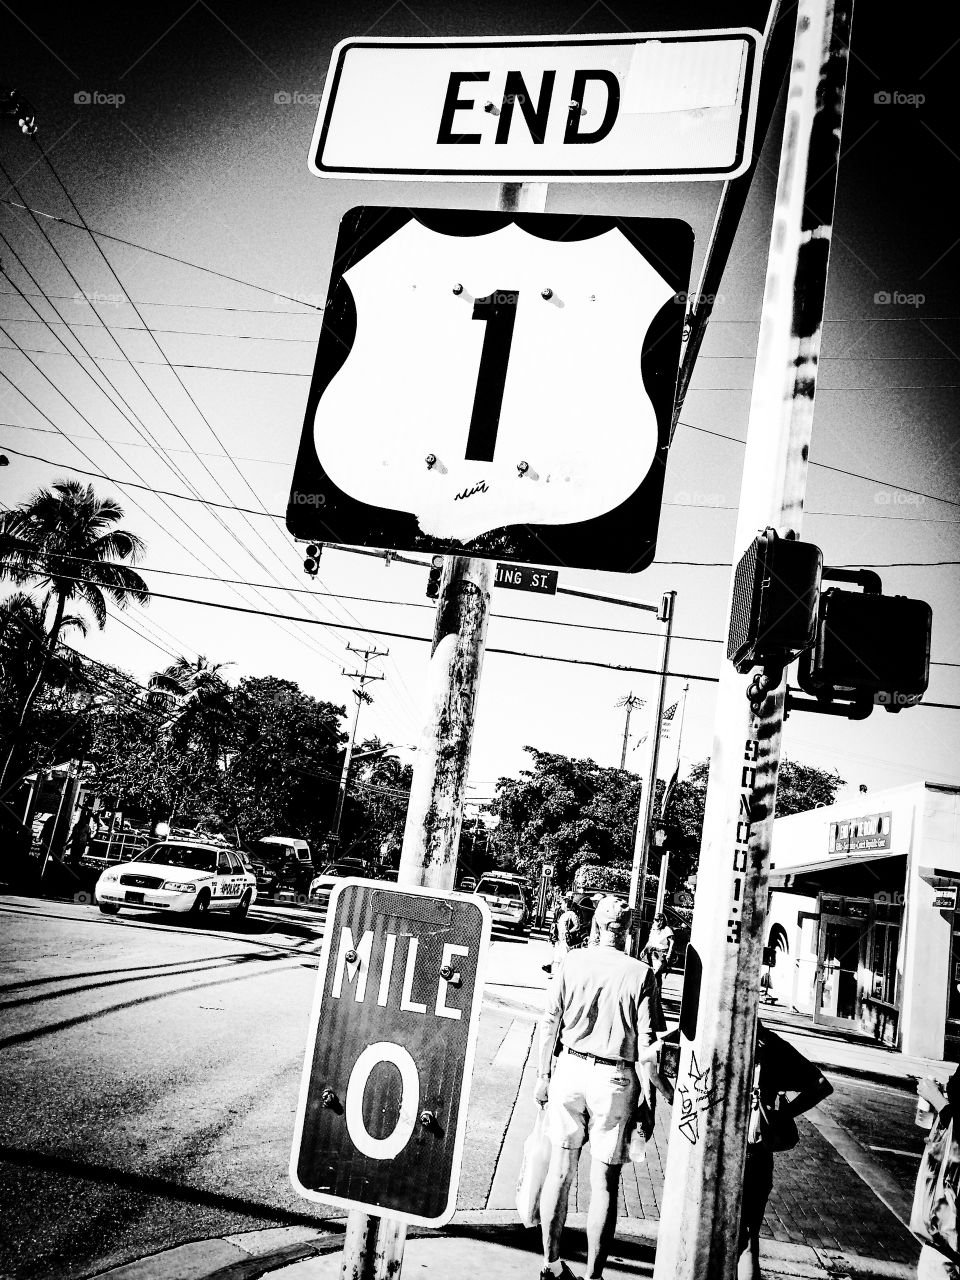 End of Route 1, Key West Florida. U S Highway 1 begins or ends depending on which way you're headed. 